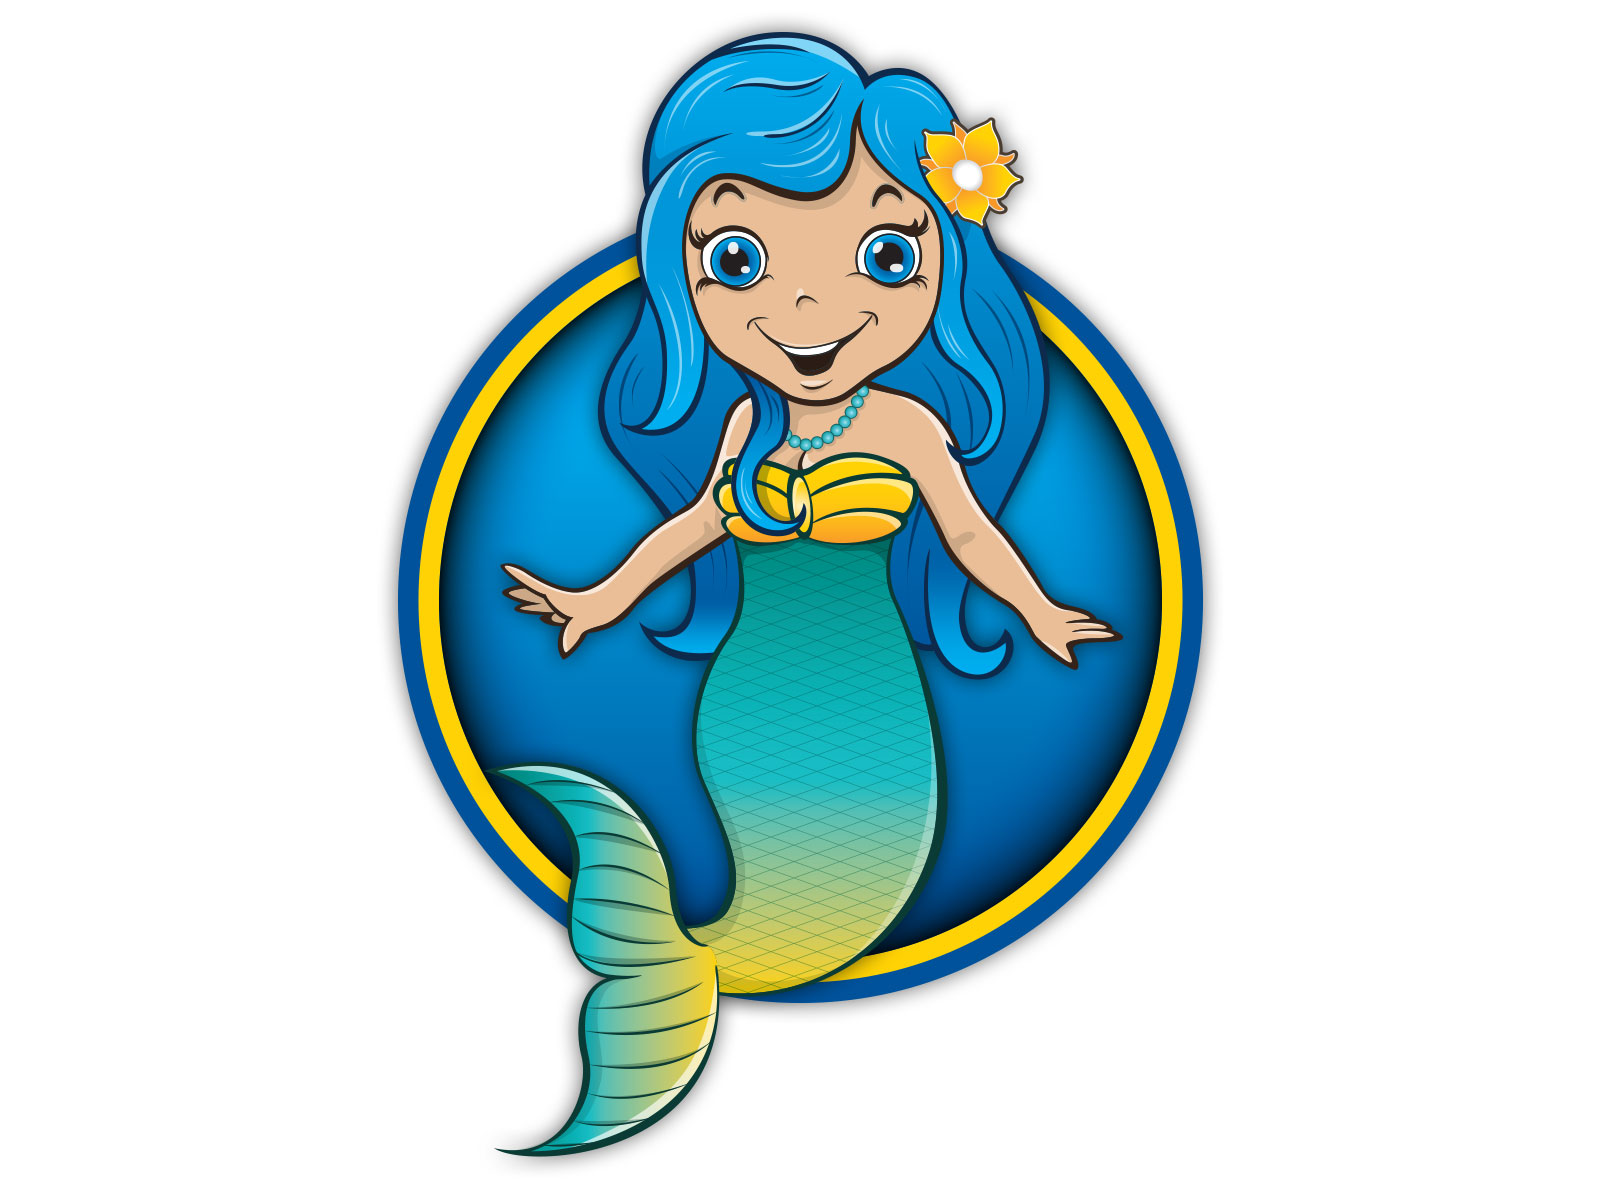 Colourful cartoon style mermaid character illustration for mascot